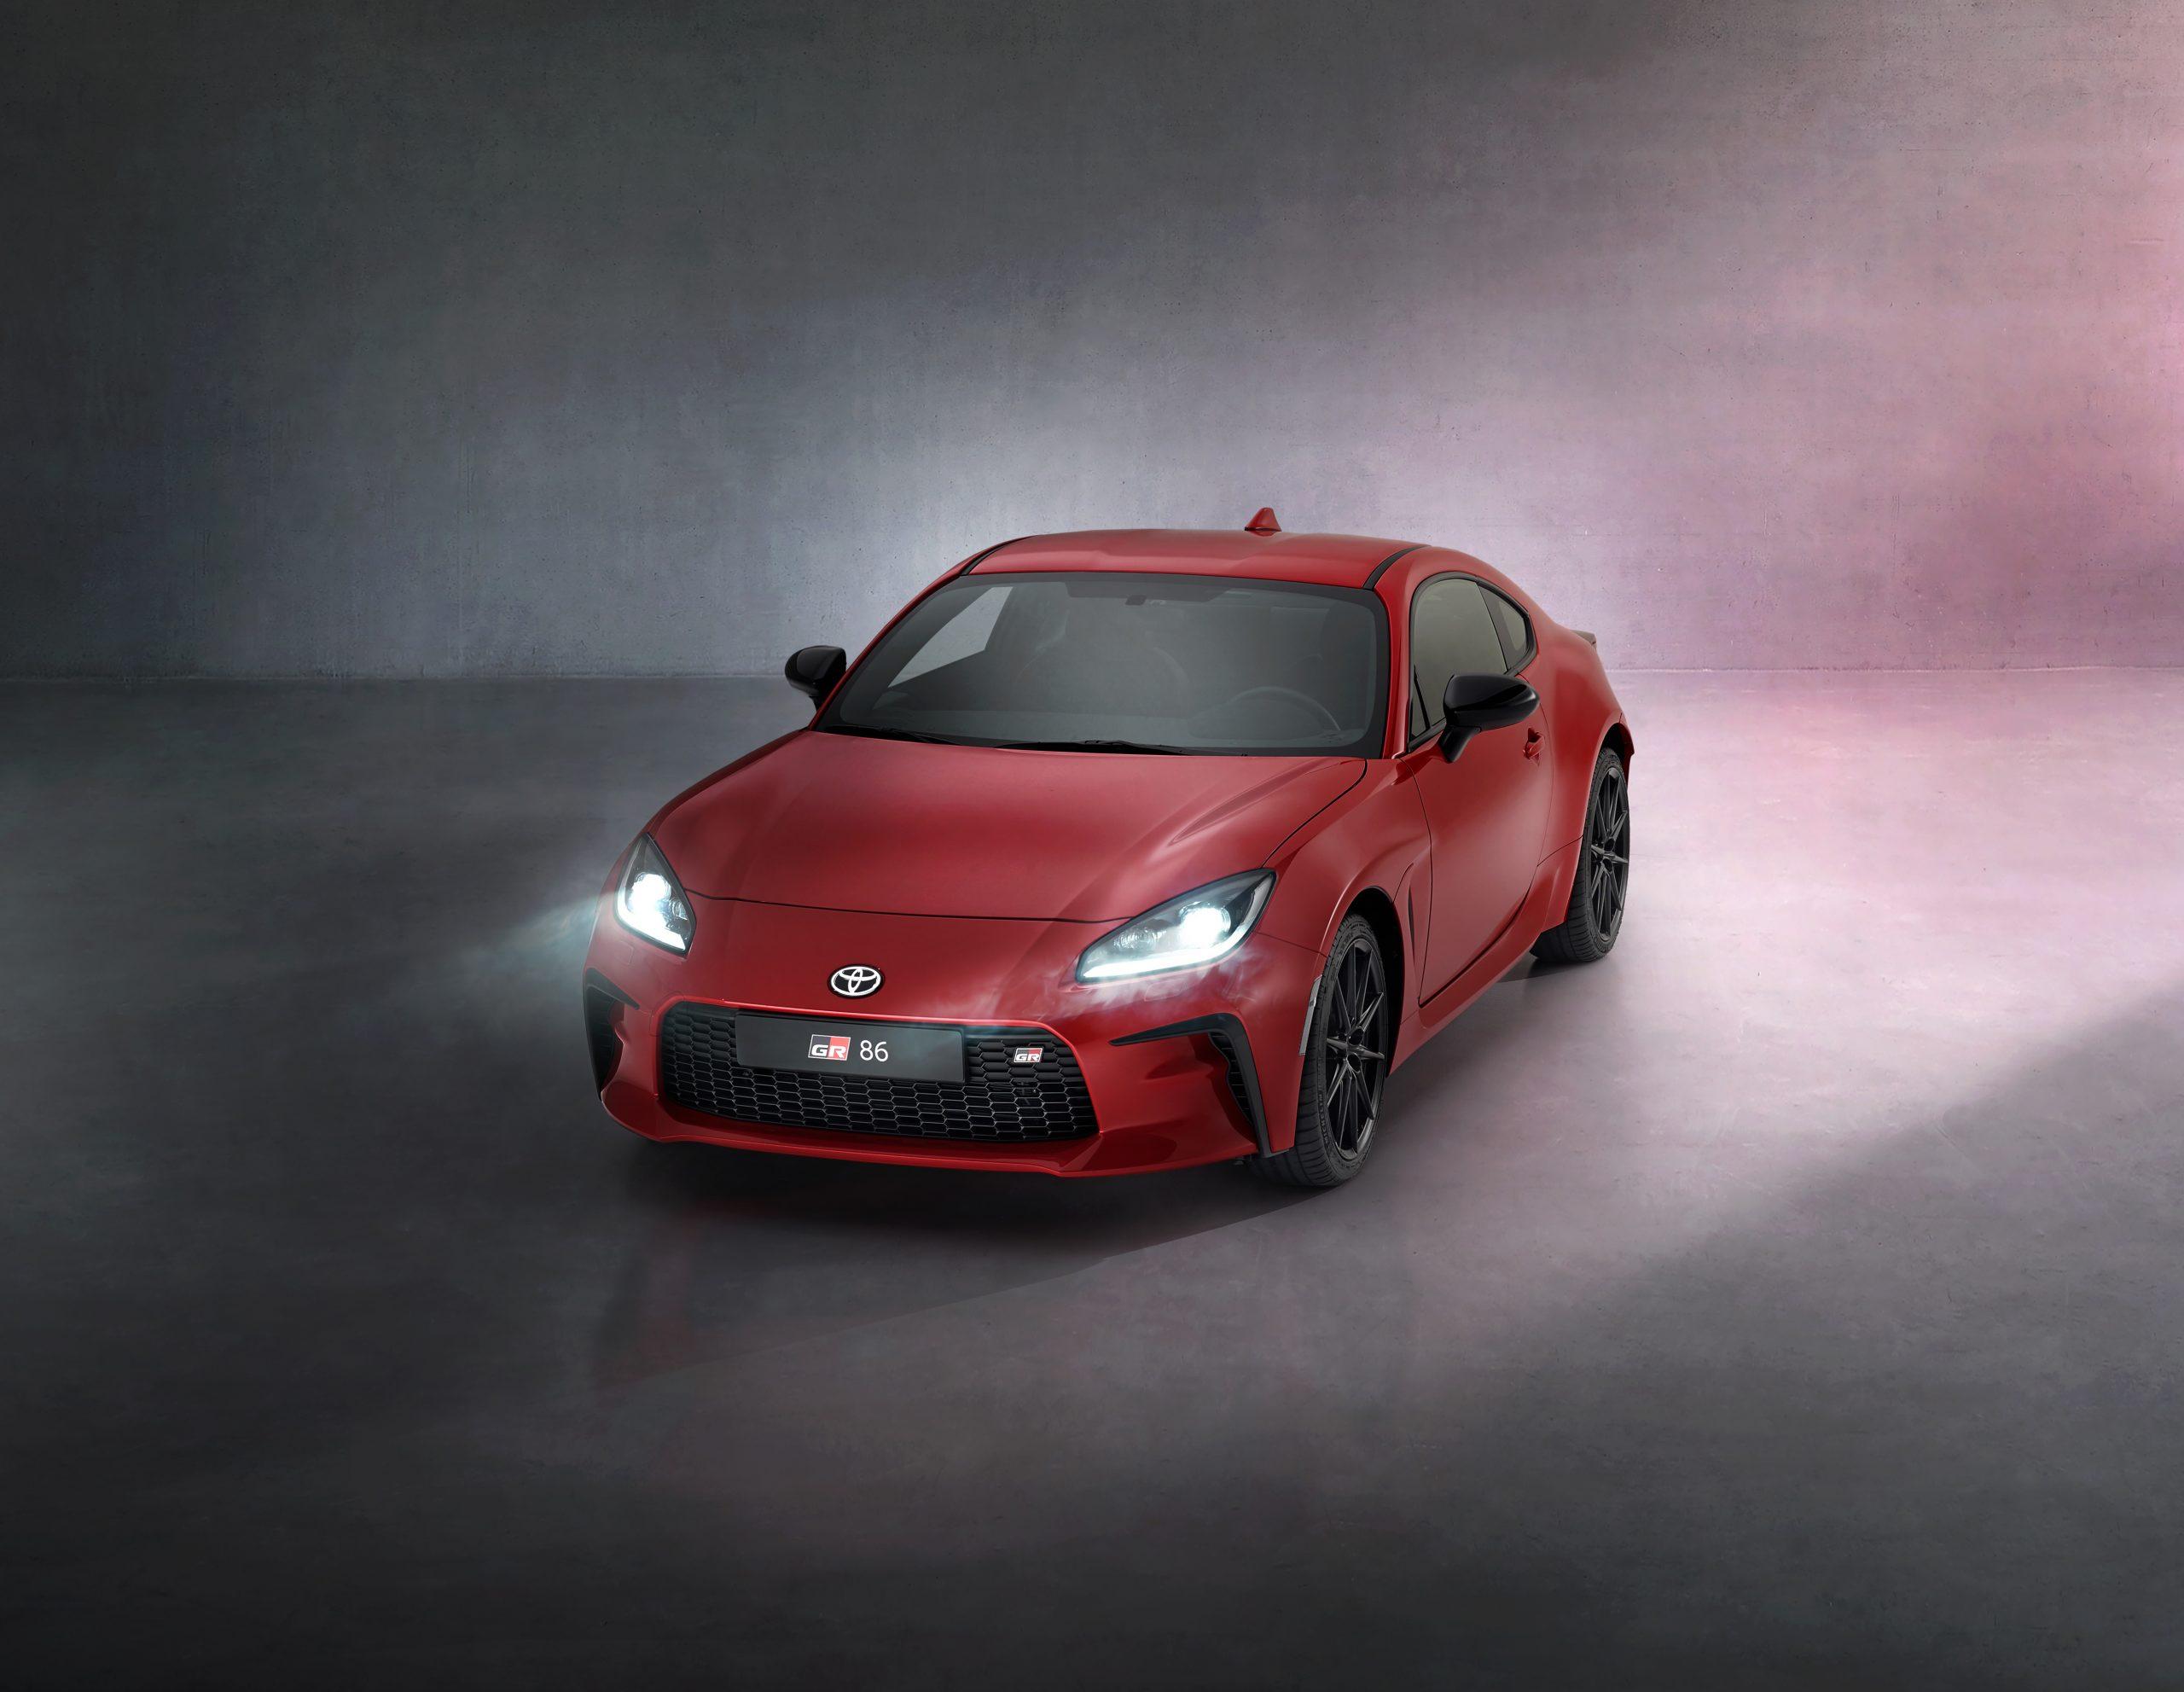 Toyota announces pricing and specification details for the new GR86 coupe